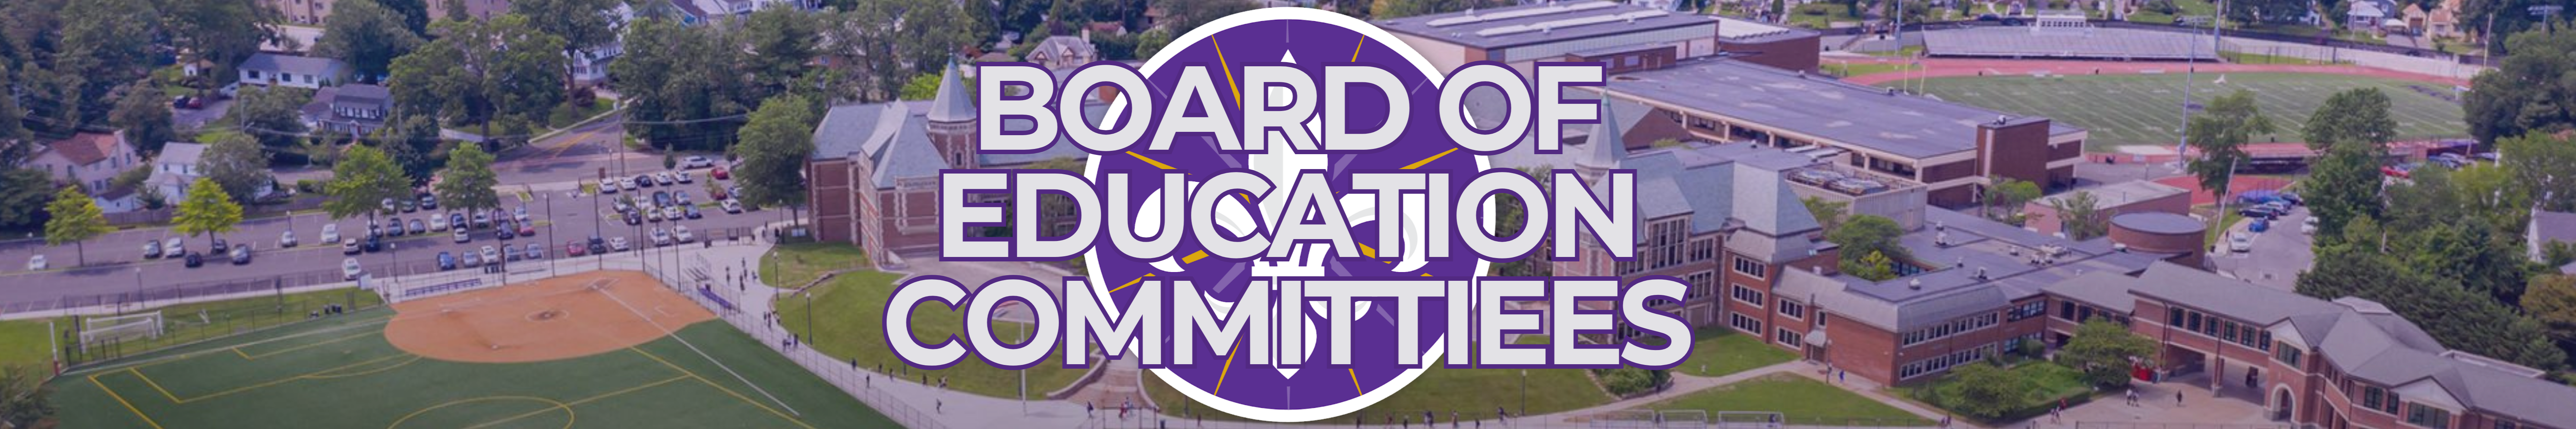 Board of Education Committiees banner